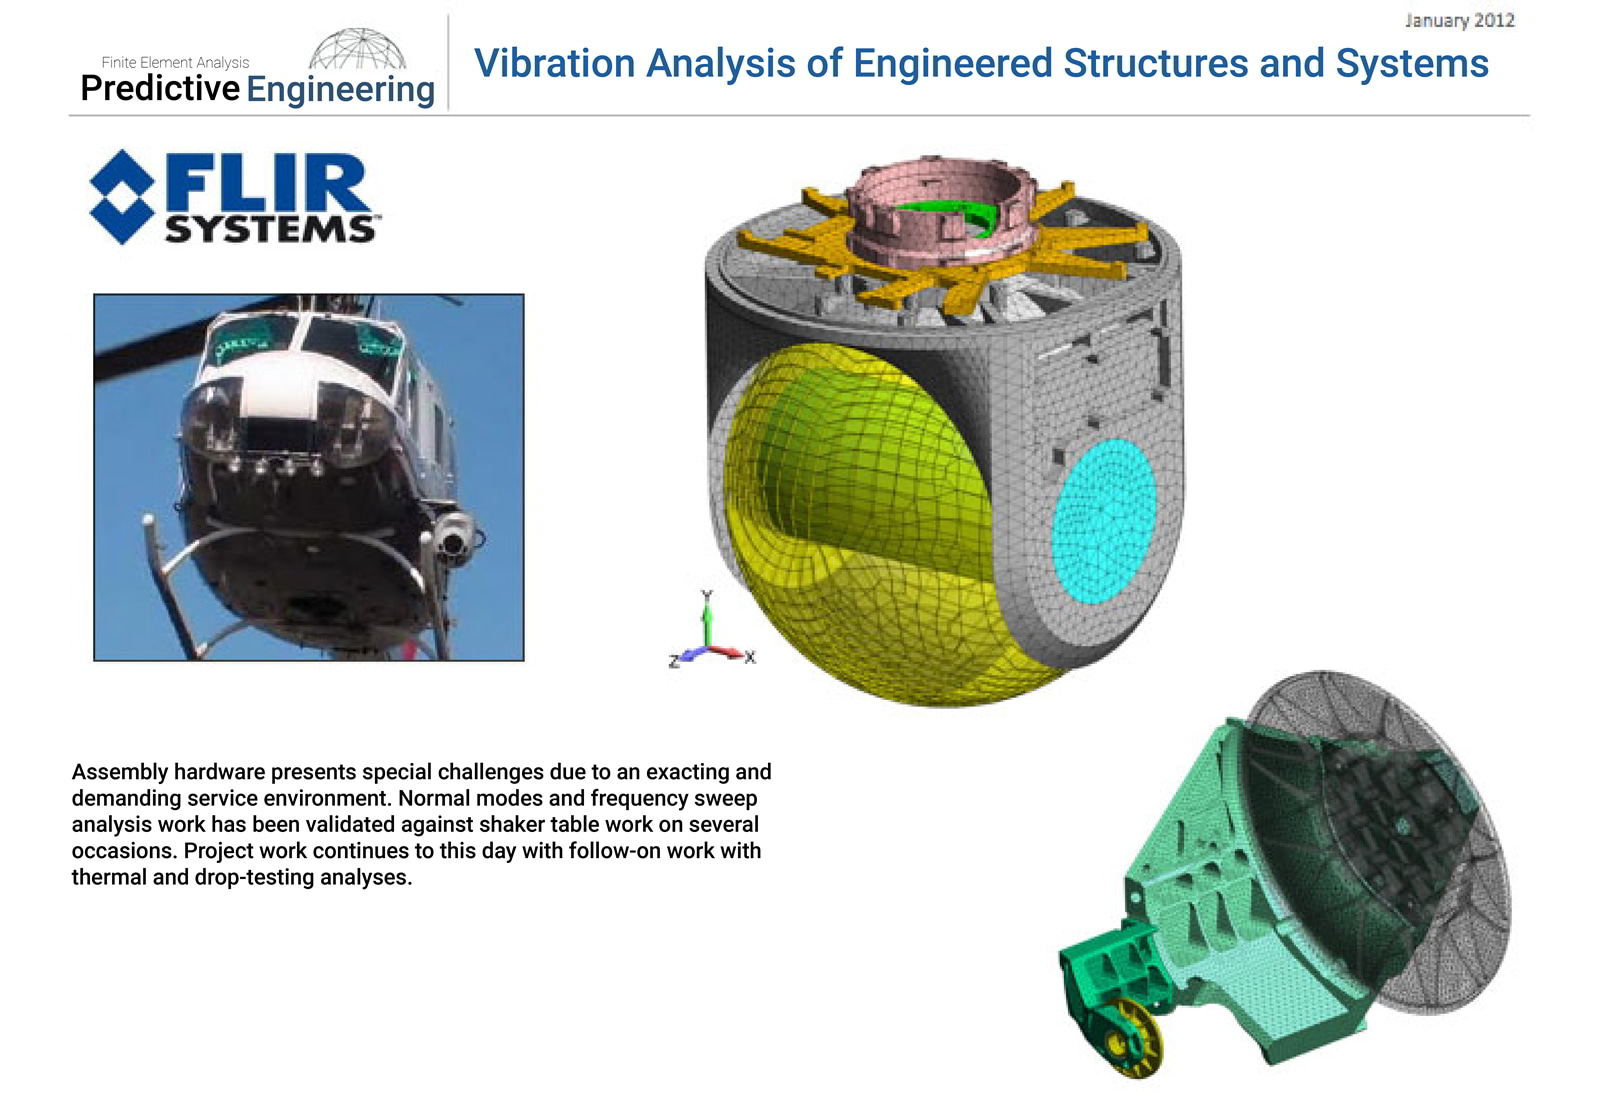 Aviation hardware presents special challenges for vibration analysis due to an exacting and demanding service environment.  Normal modes and frequency sweep analysis work has been validated against shaker table work on several occasions. 